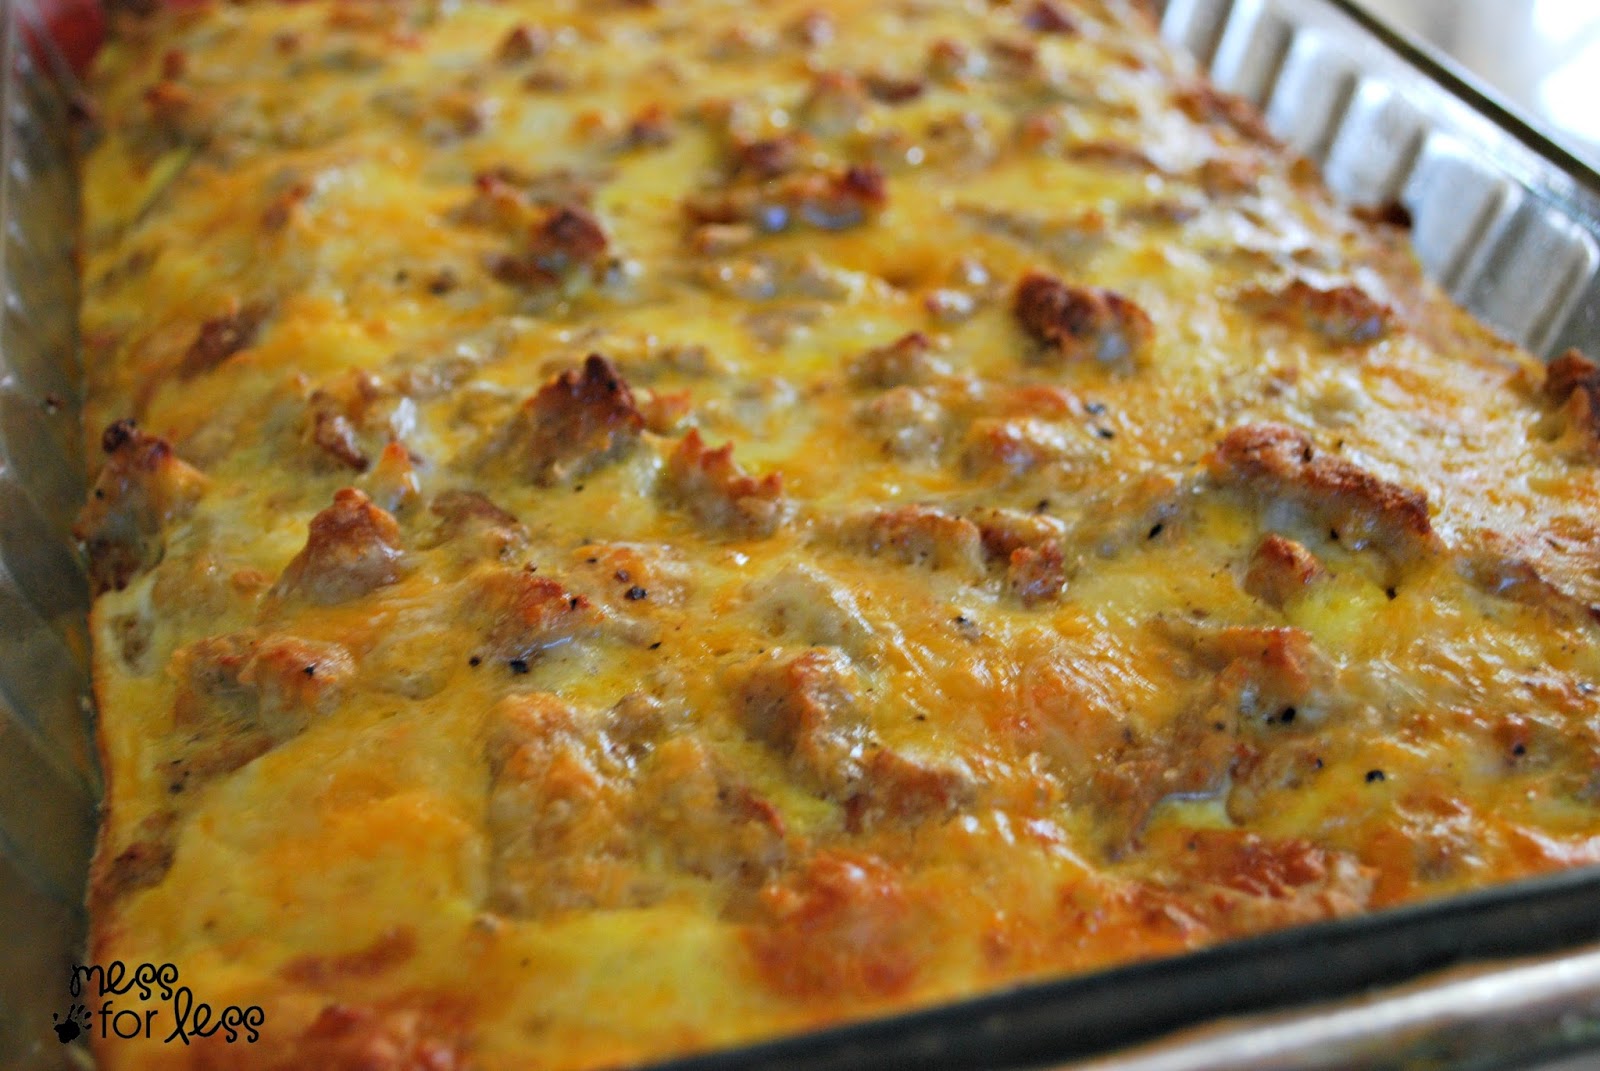 Sausage, Egg and Biscuit Breakfast Casserole - Food Fun Friday | Mess